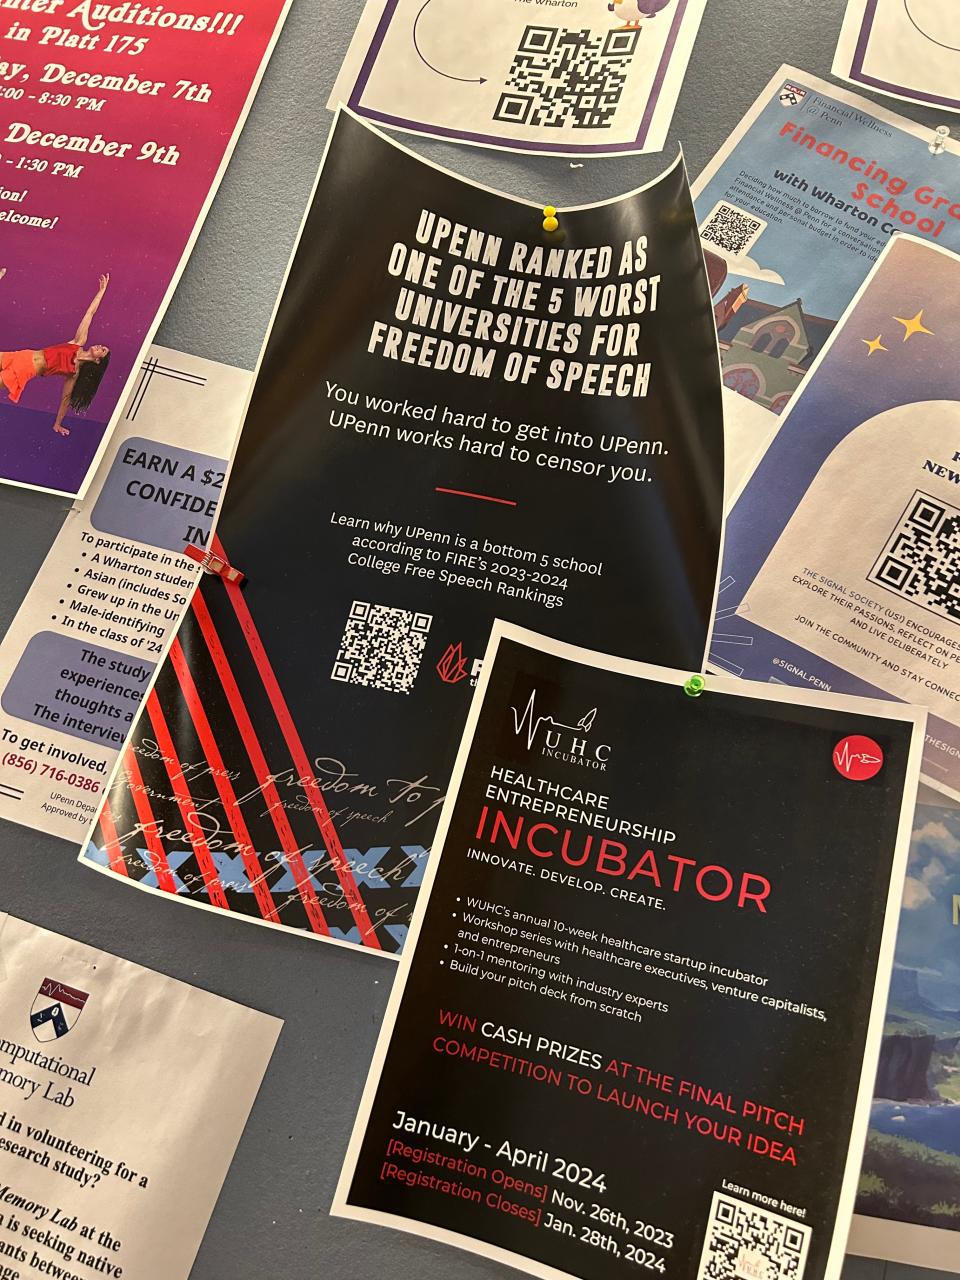 A flier posted inside the Jon Huntsman Hall at the University of Penn's Wharton School takes the university to task for its stance on free speech.